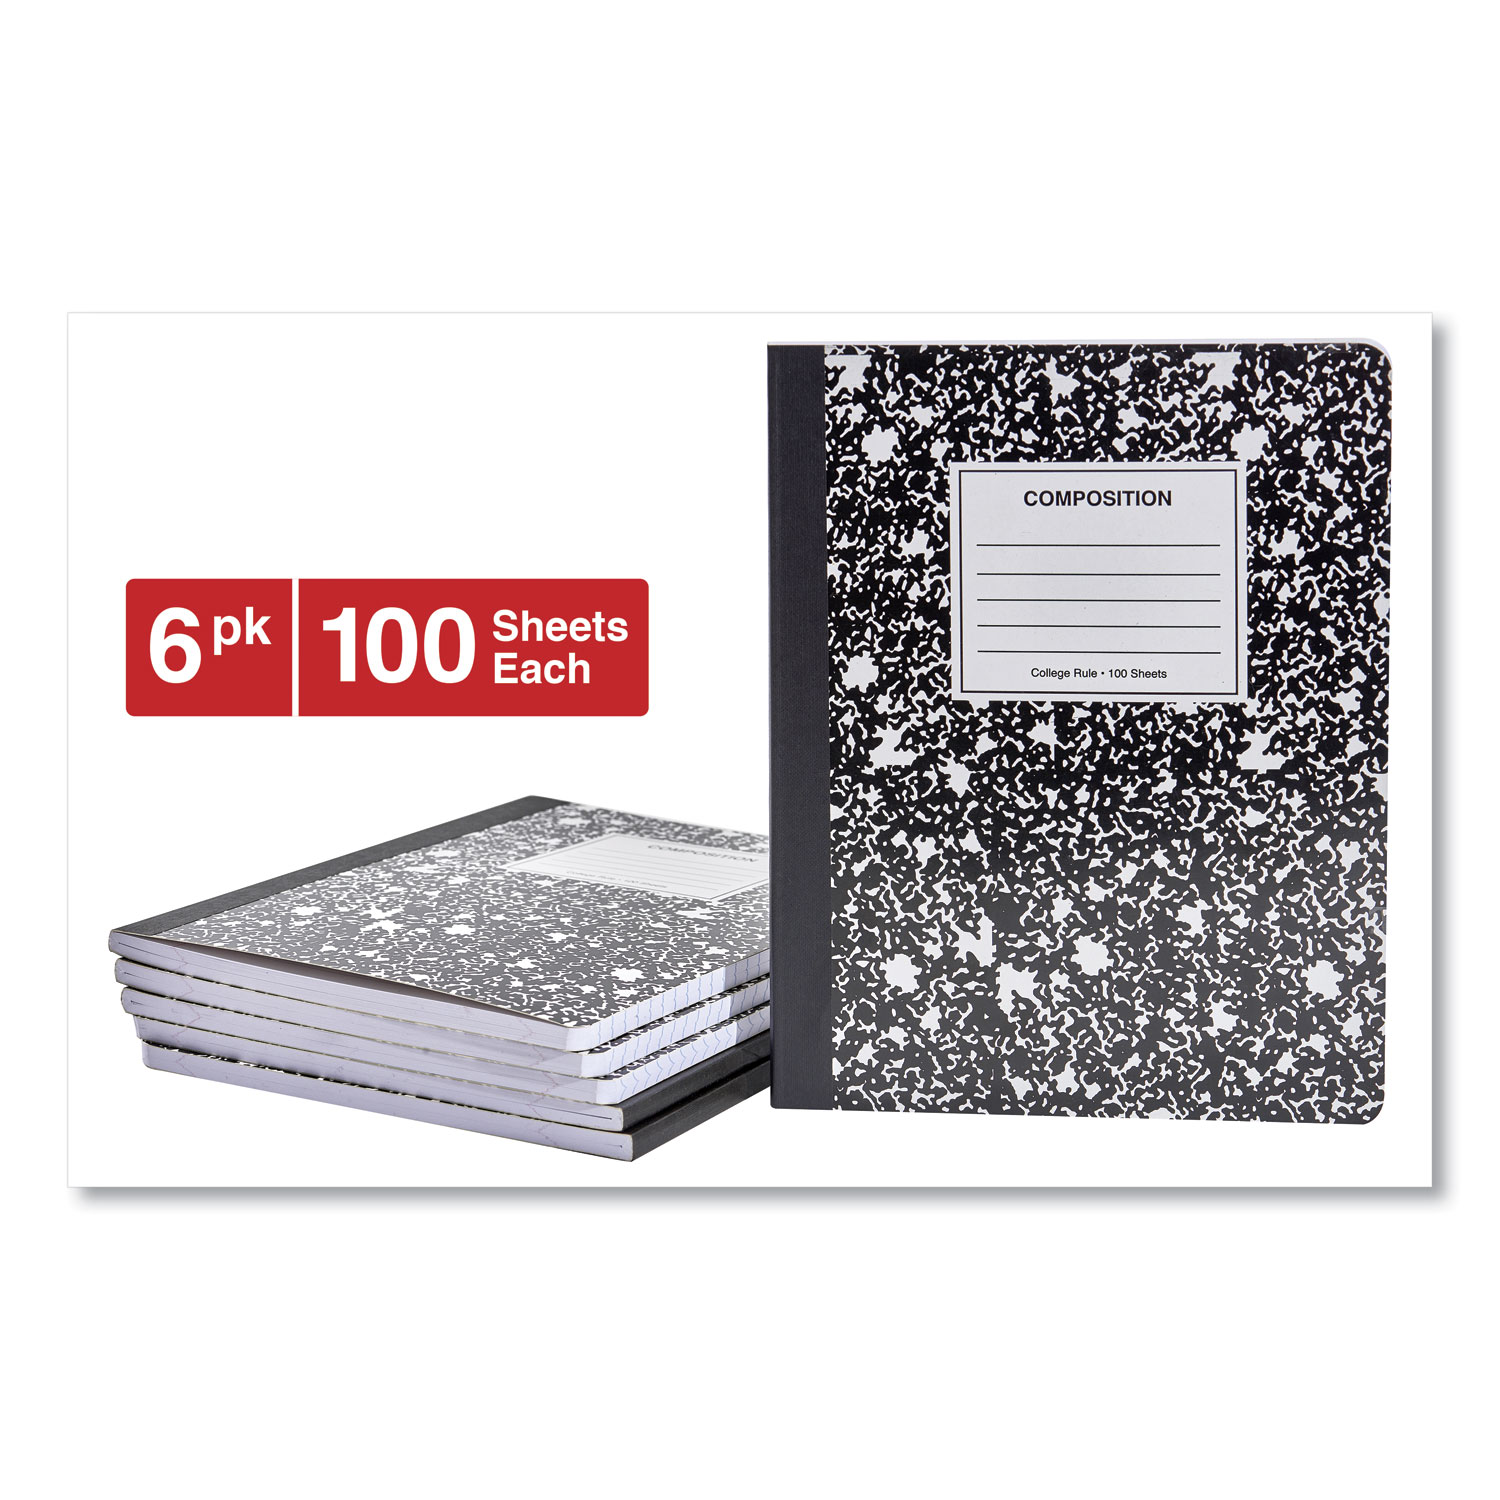  Universal UNV20946 Composition Book, Medium/College Rule, Black Marble, 9.75 x 7.5, 100 Sheets, 6/Pack (UNV20946) 